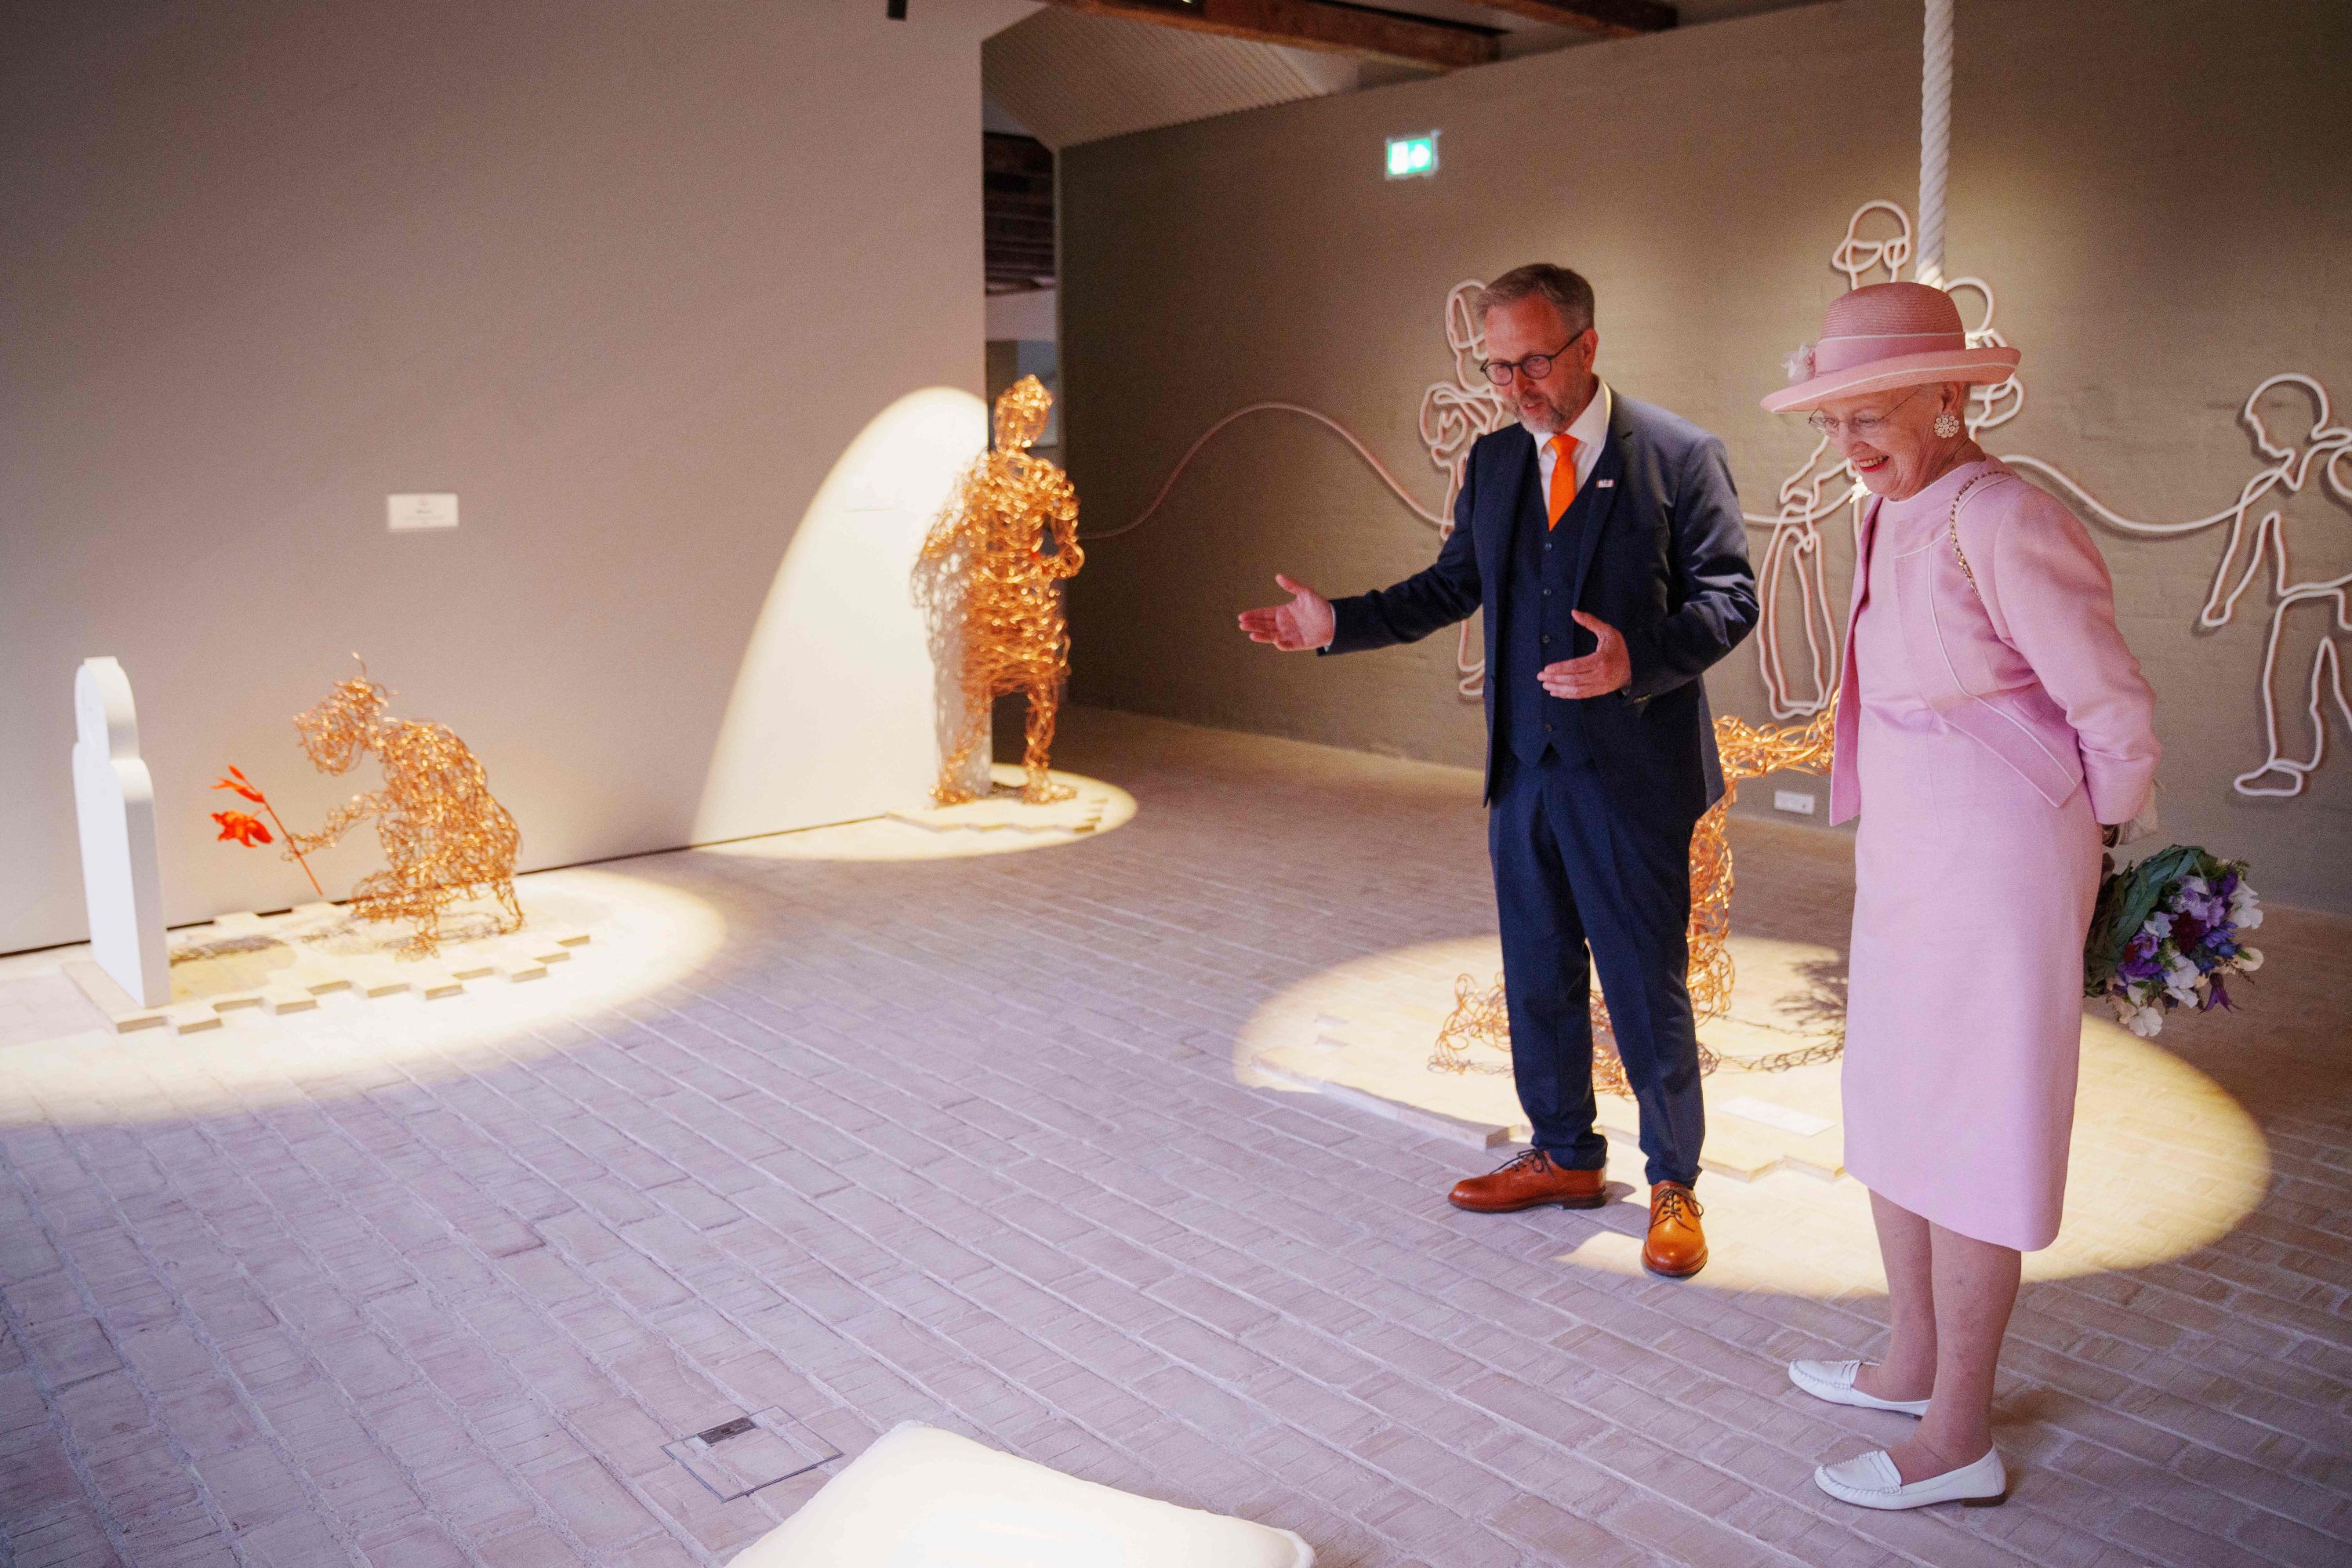 Danish Queen Margrethe (R) and museum director Claus Kjeld Jensen visit the exhibition during the inauguration of the new Danish refugee museum FLUGT (escape) in Oksboel, Denmark, June 25, 2022. (AFP Photo)